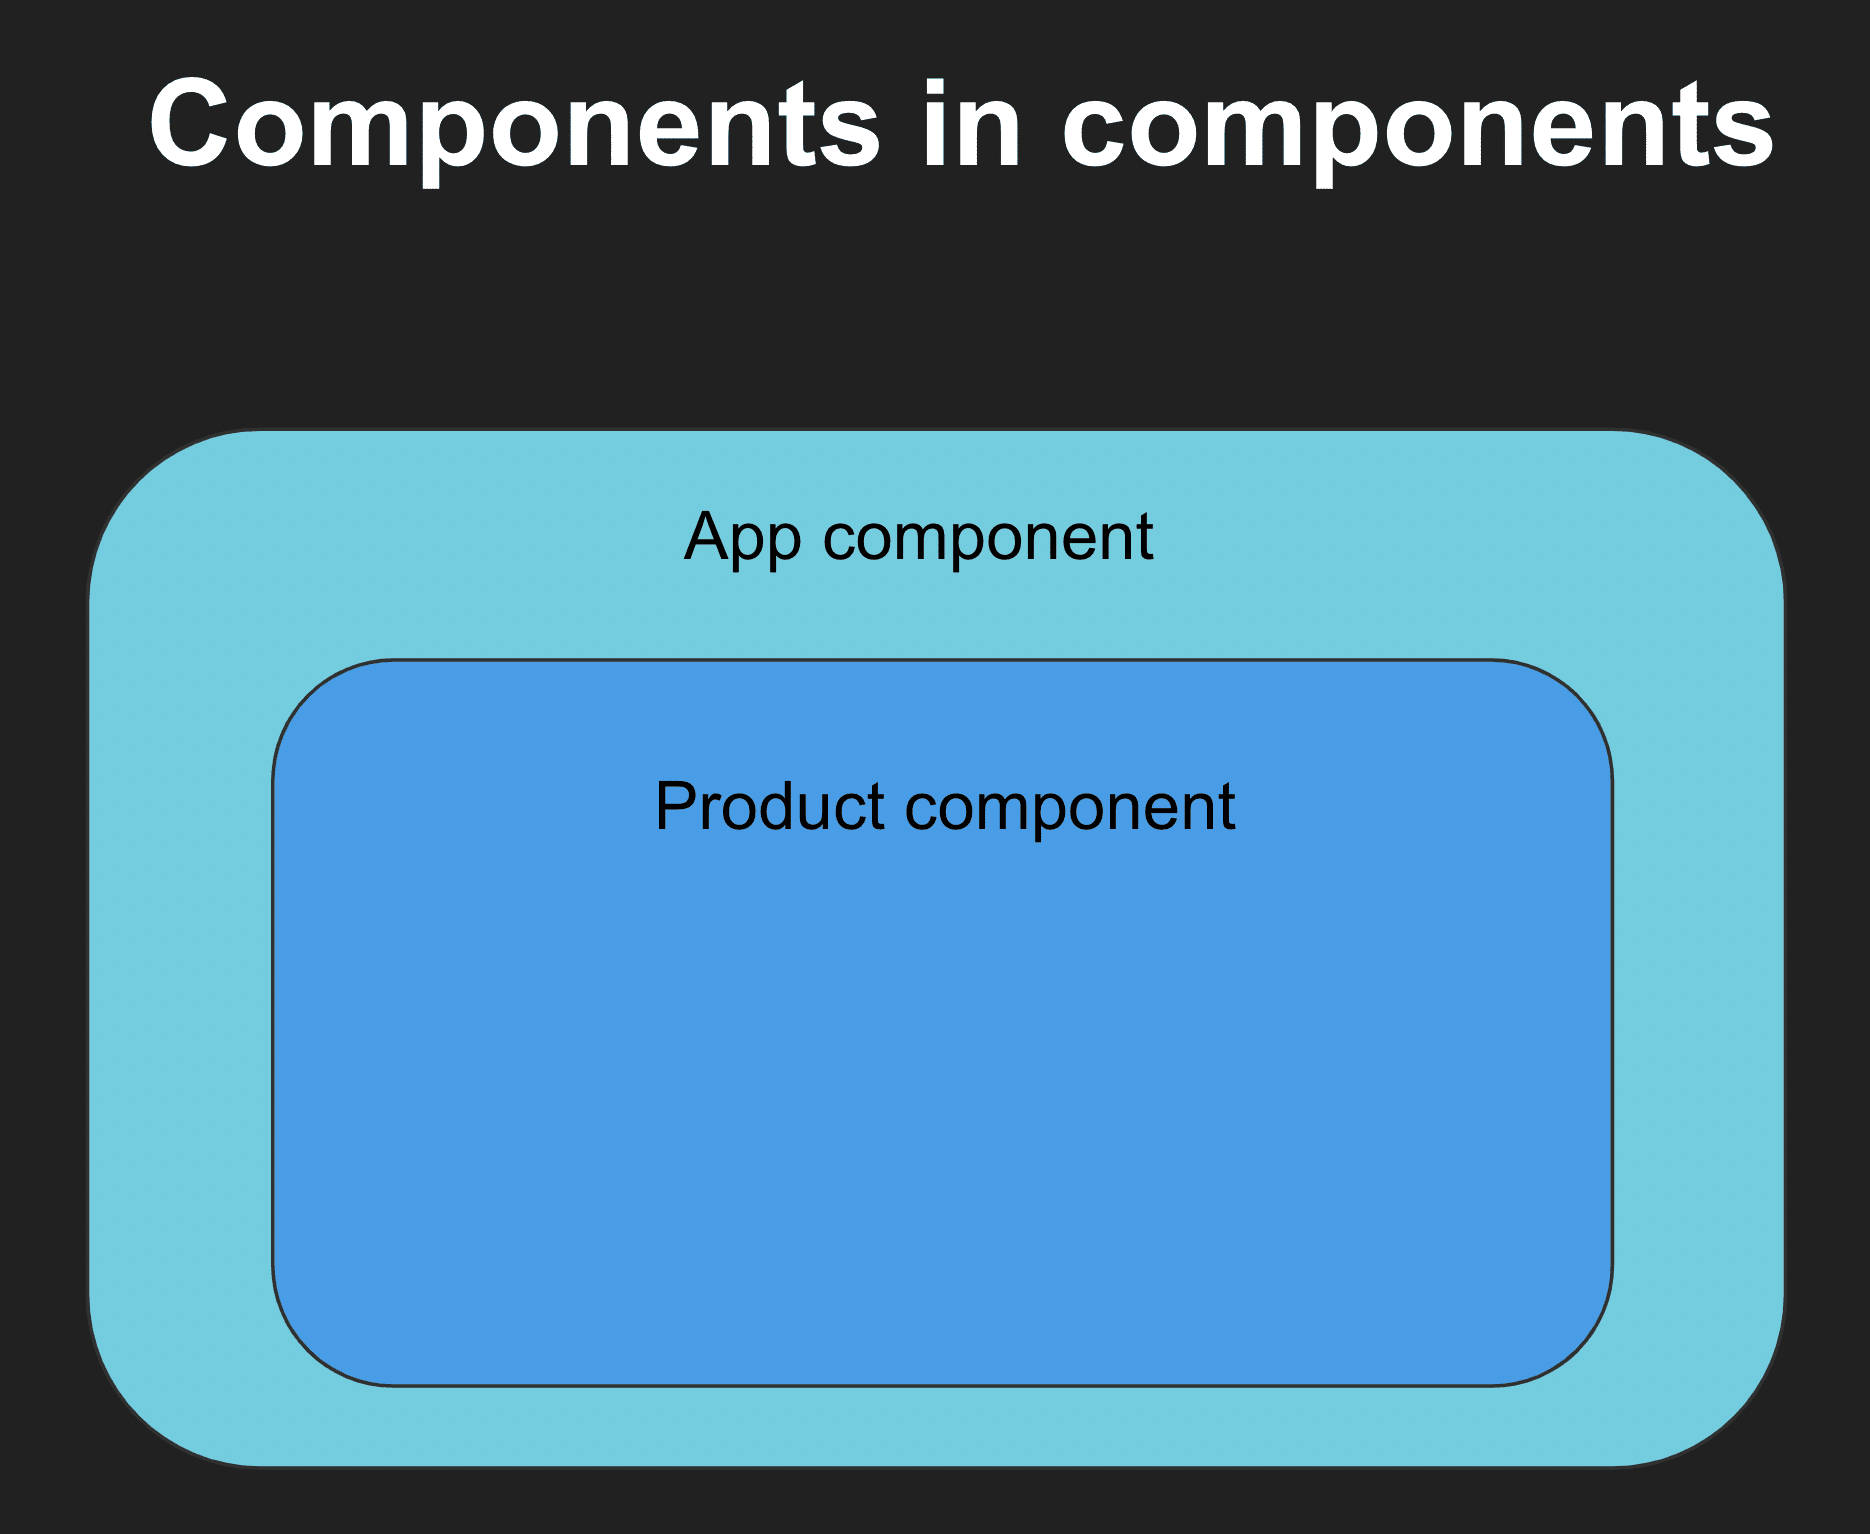 A Component in a Component